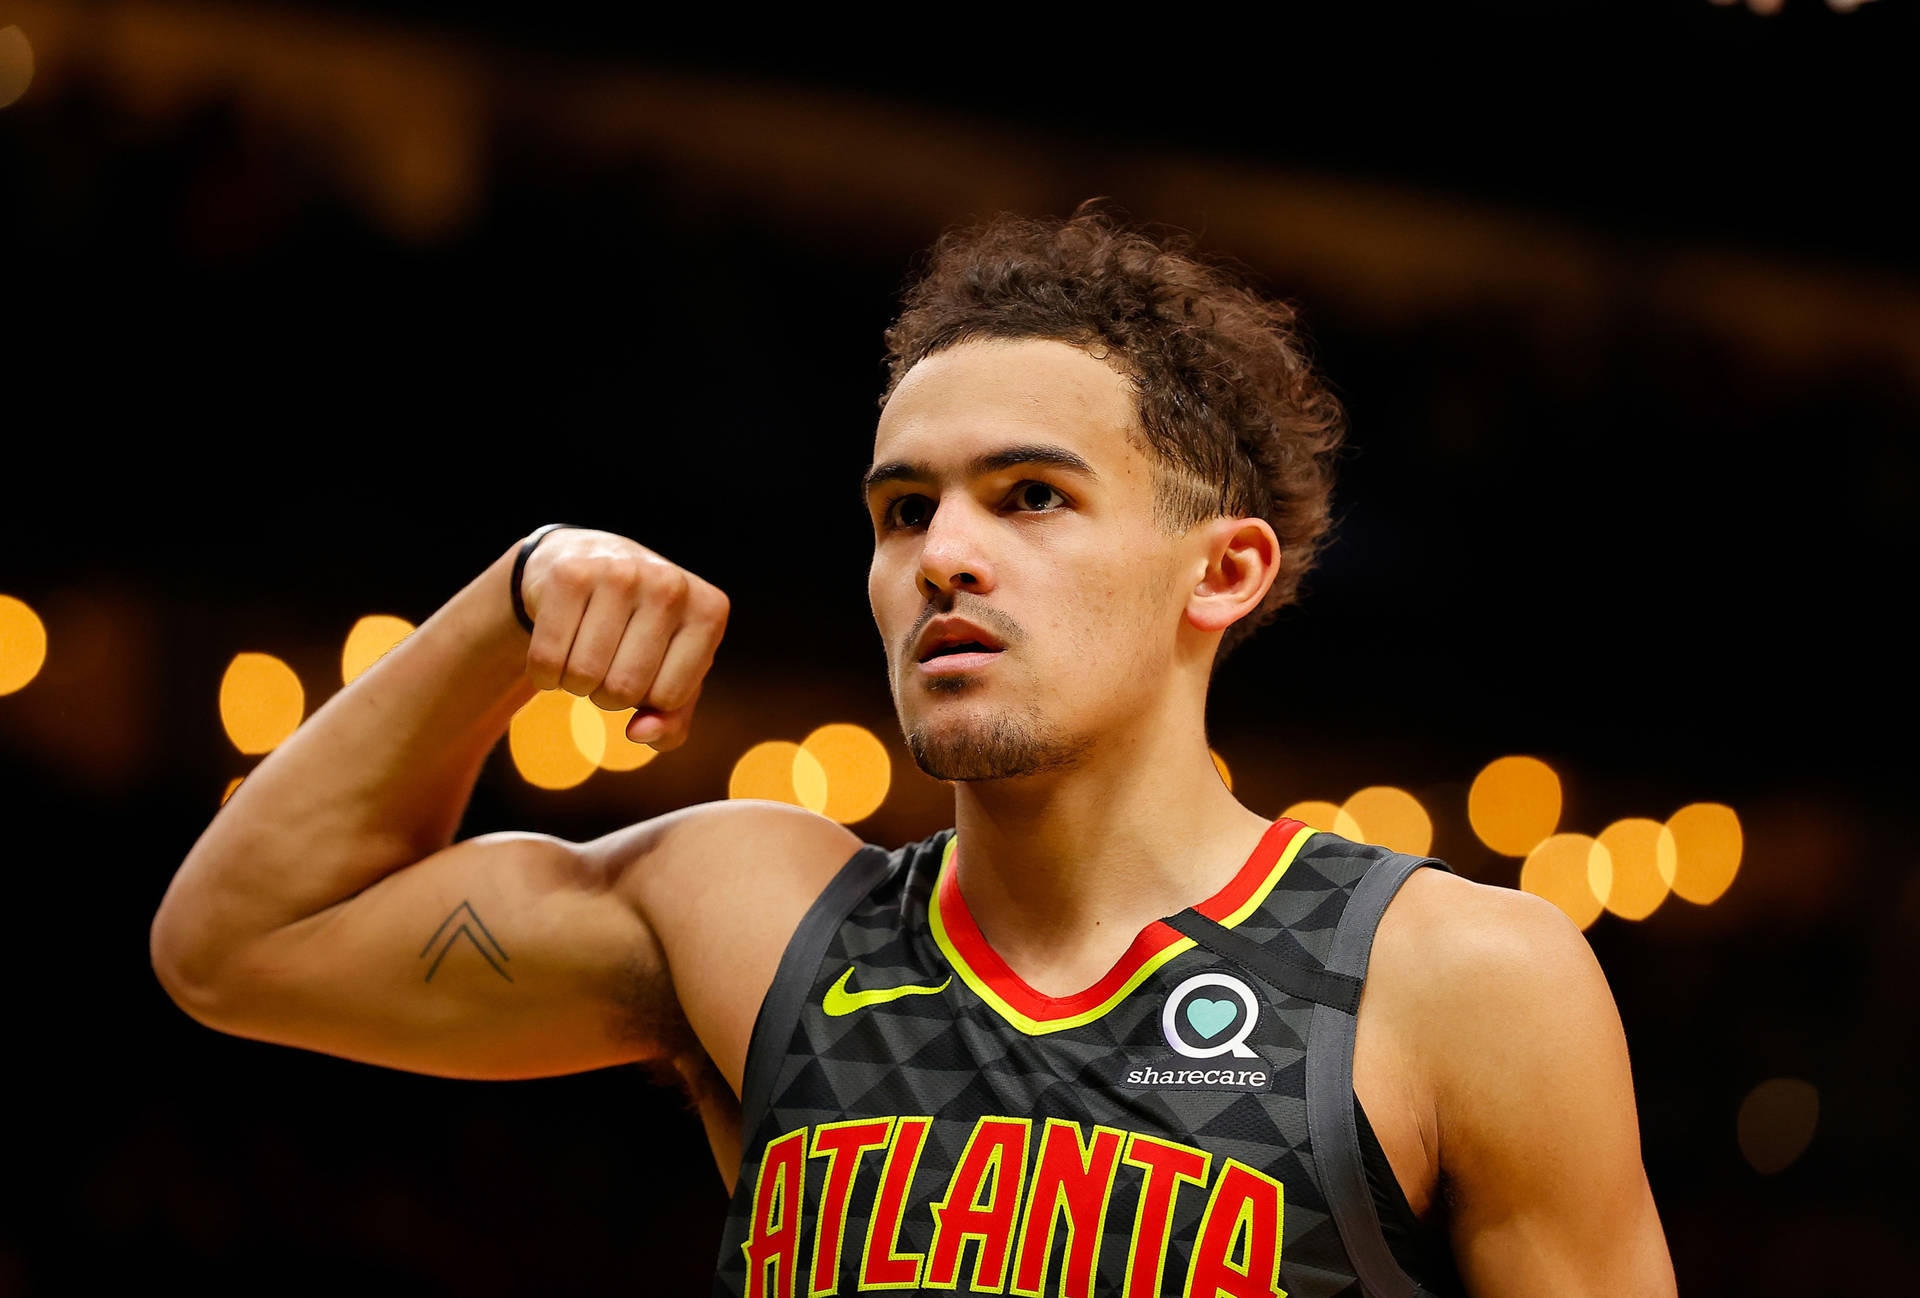 Trae Young Background Wallpaper